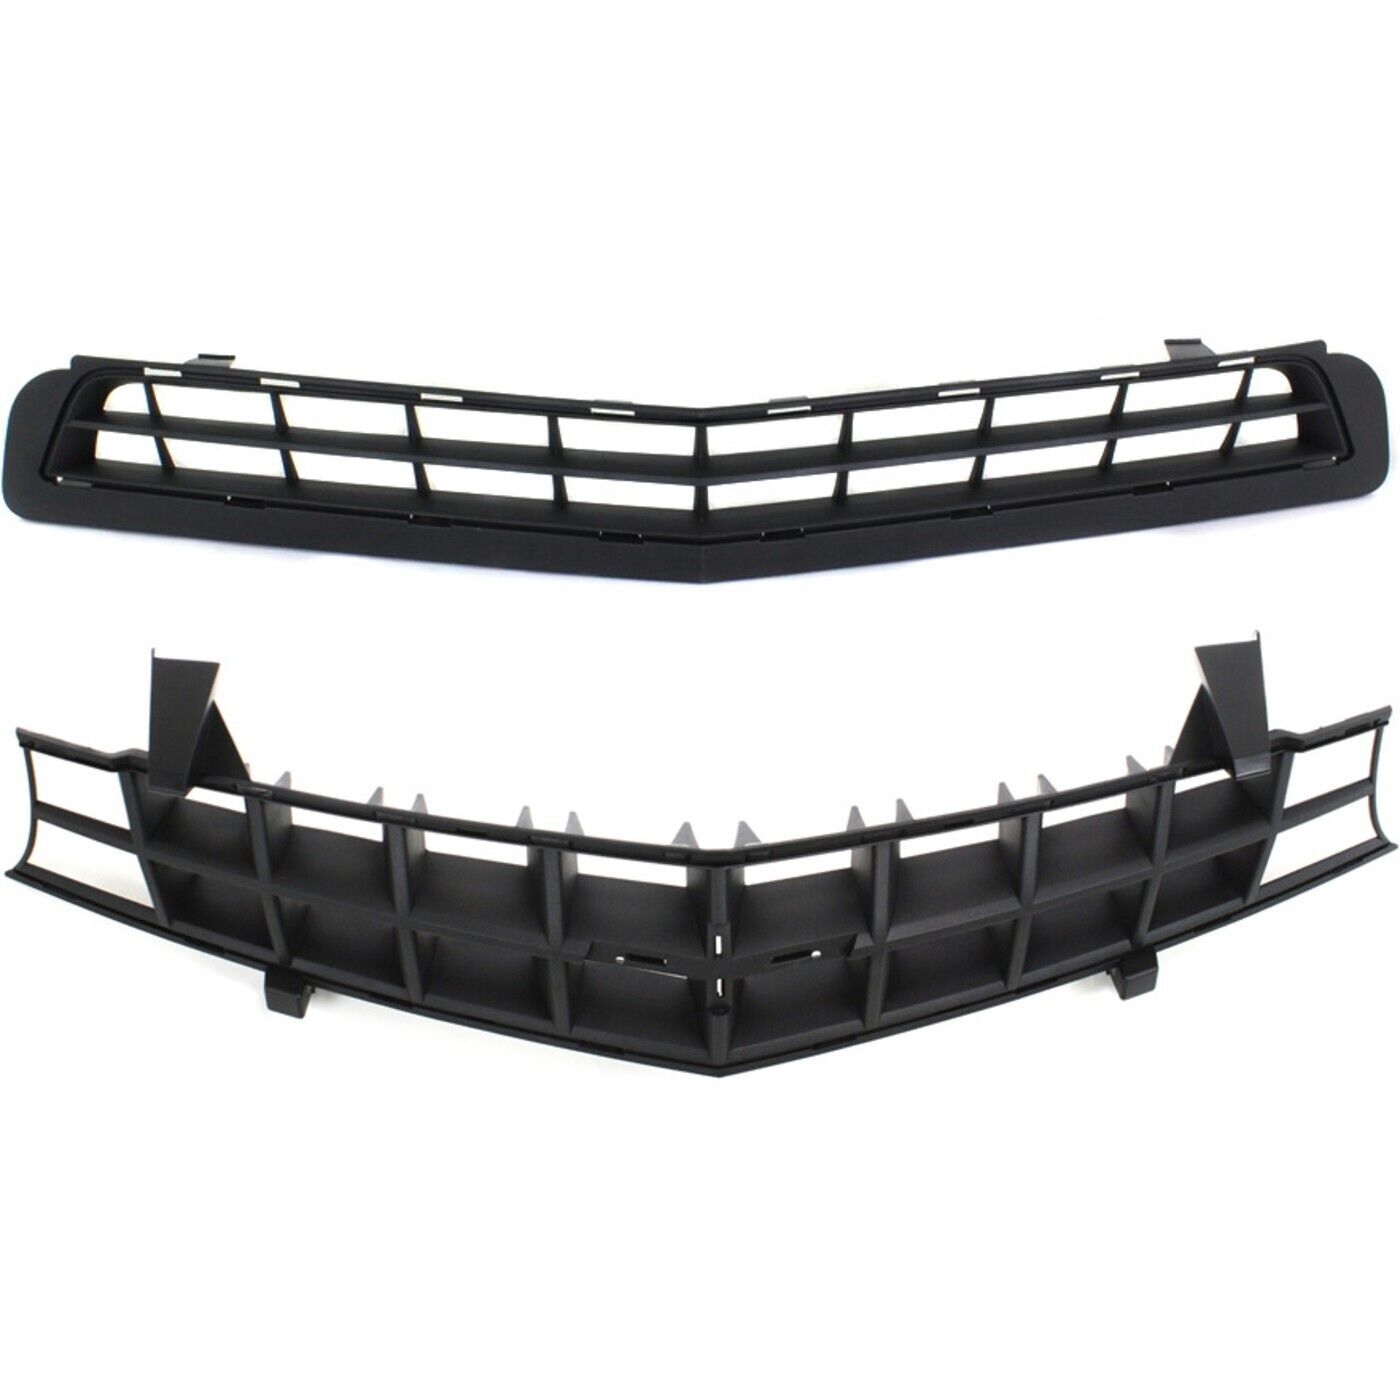 Grille Assembly Kit For 10-13 Chevrolet Camaro Textured Black Shell and Insert